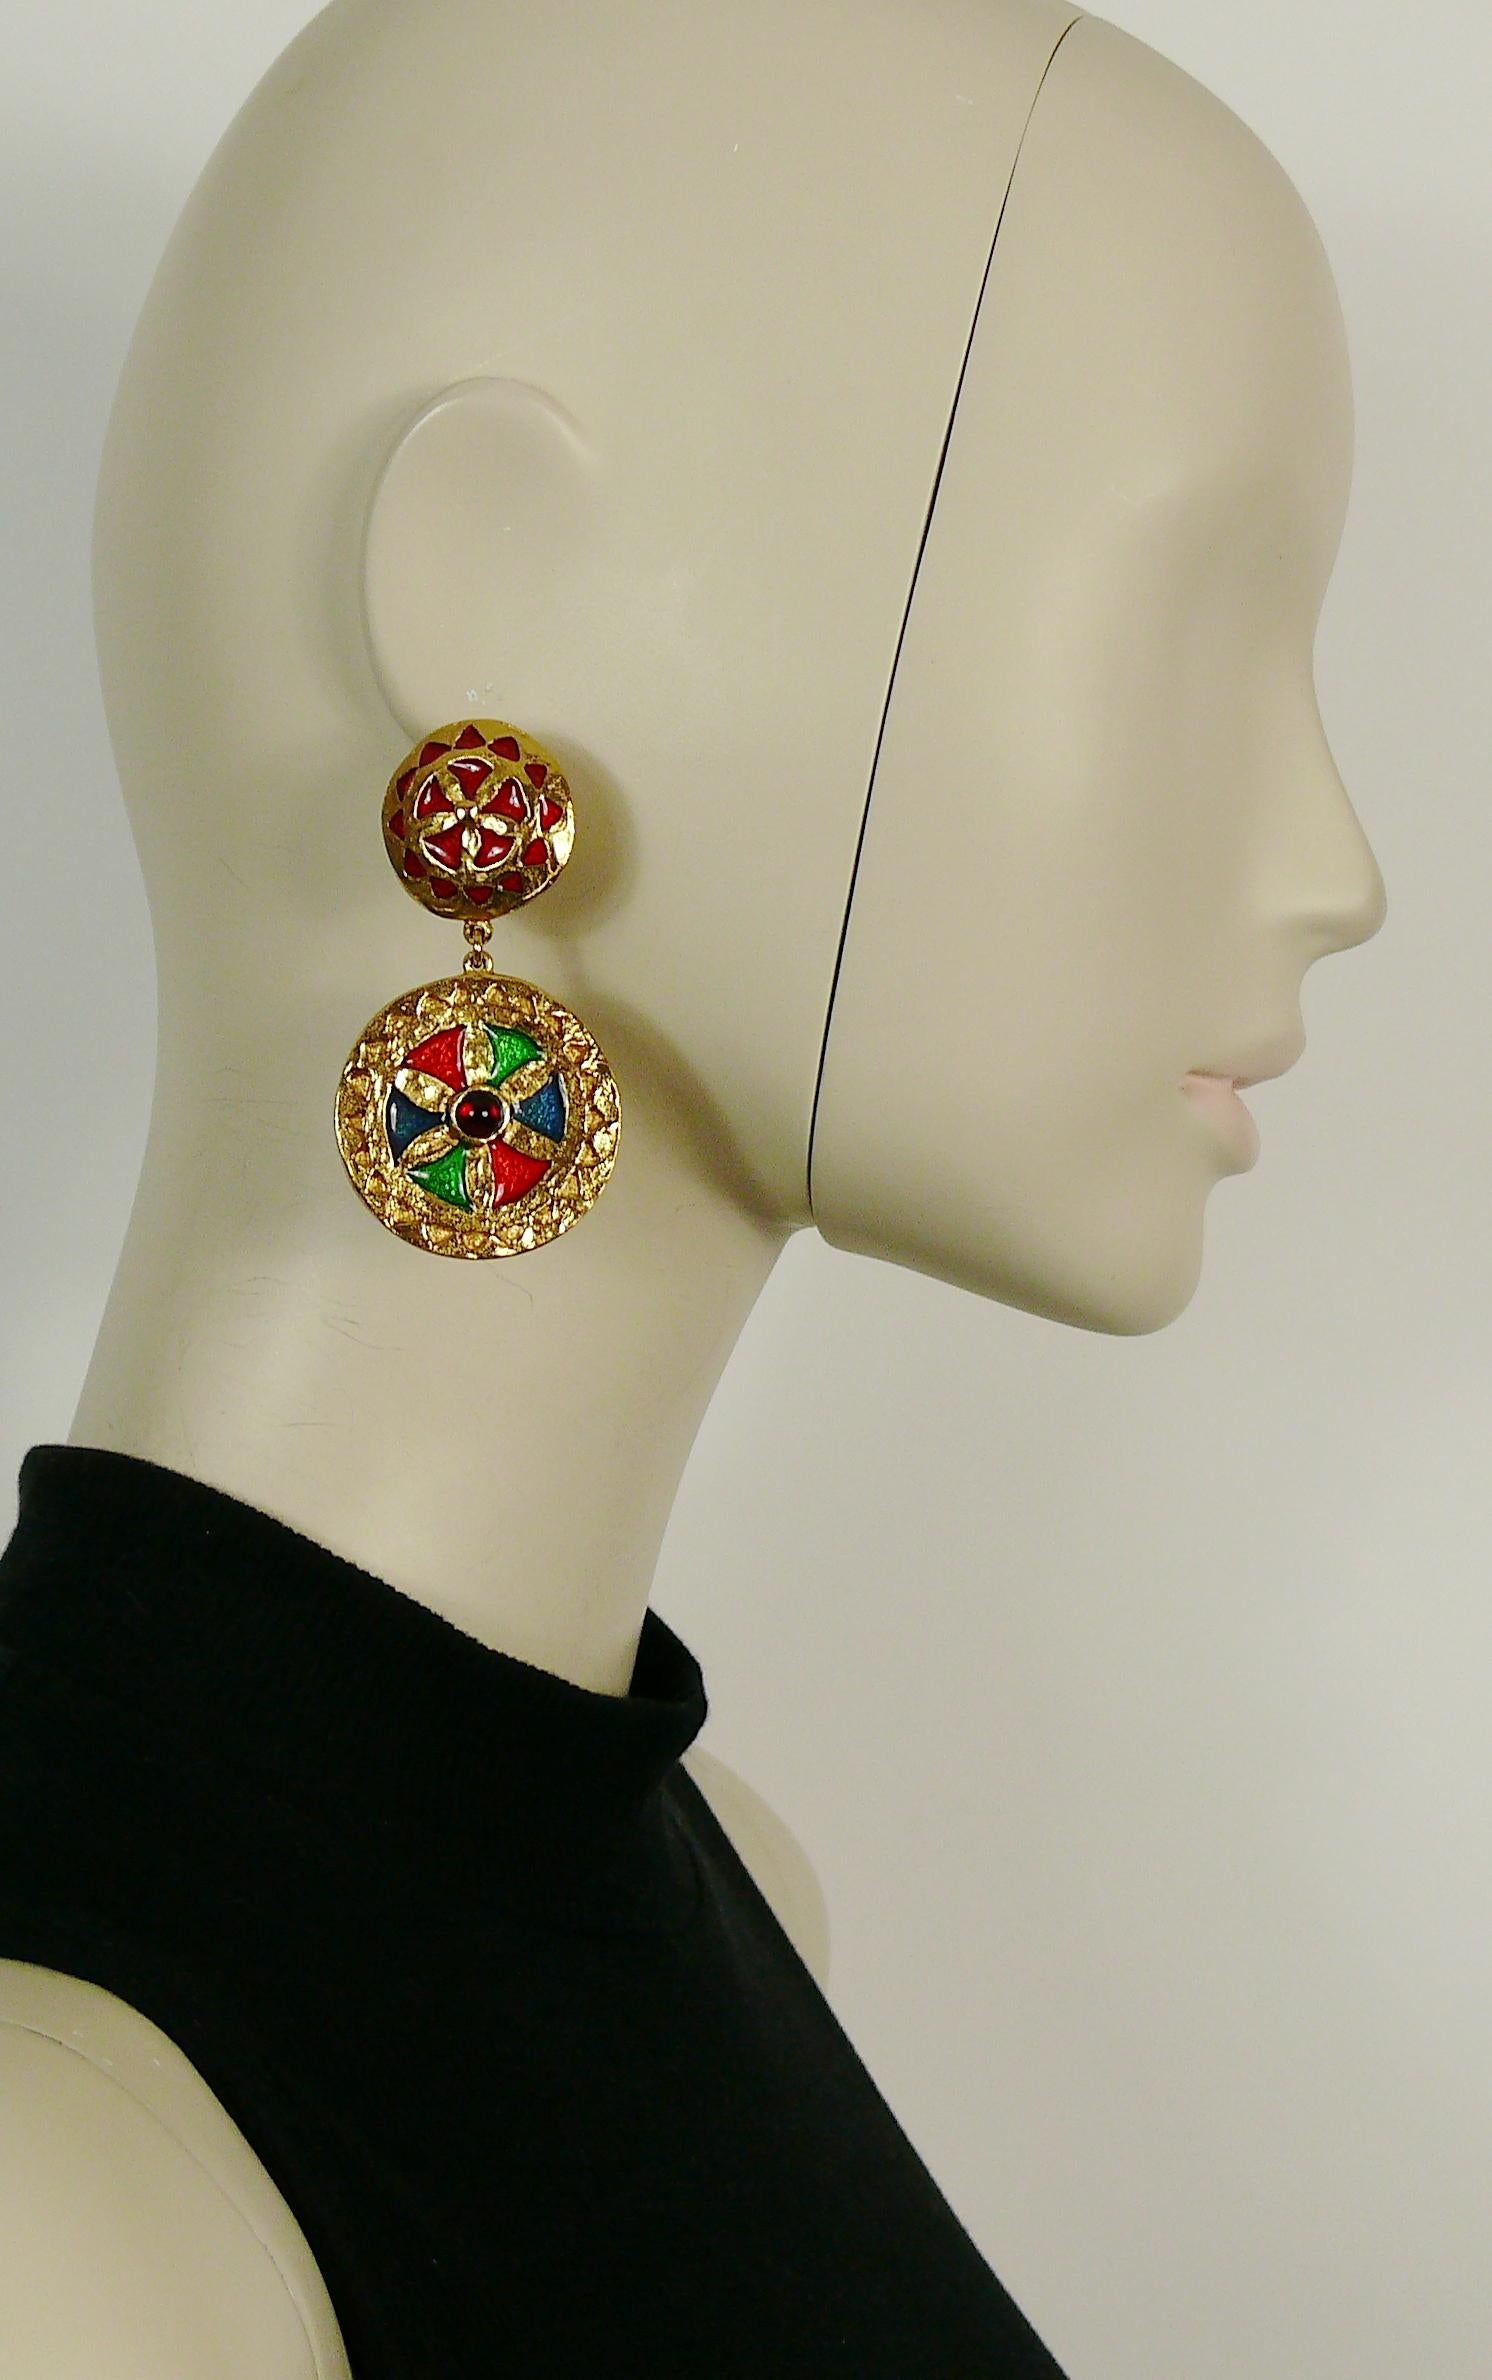 YVES SAINT LAURENT vintage gold toned dangling earrings featuring shields embellished with multicolored enamel and red glass cabochon.

Marked YSL.
Made in France.

Indicative measurements : height approx. 7.1 cm (2.80 inches) / max. diameter